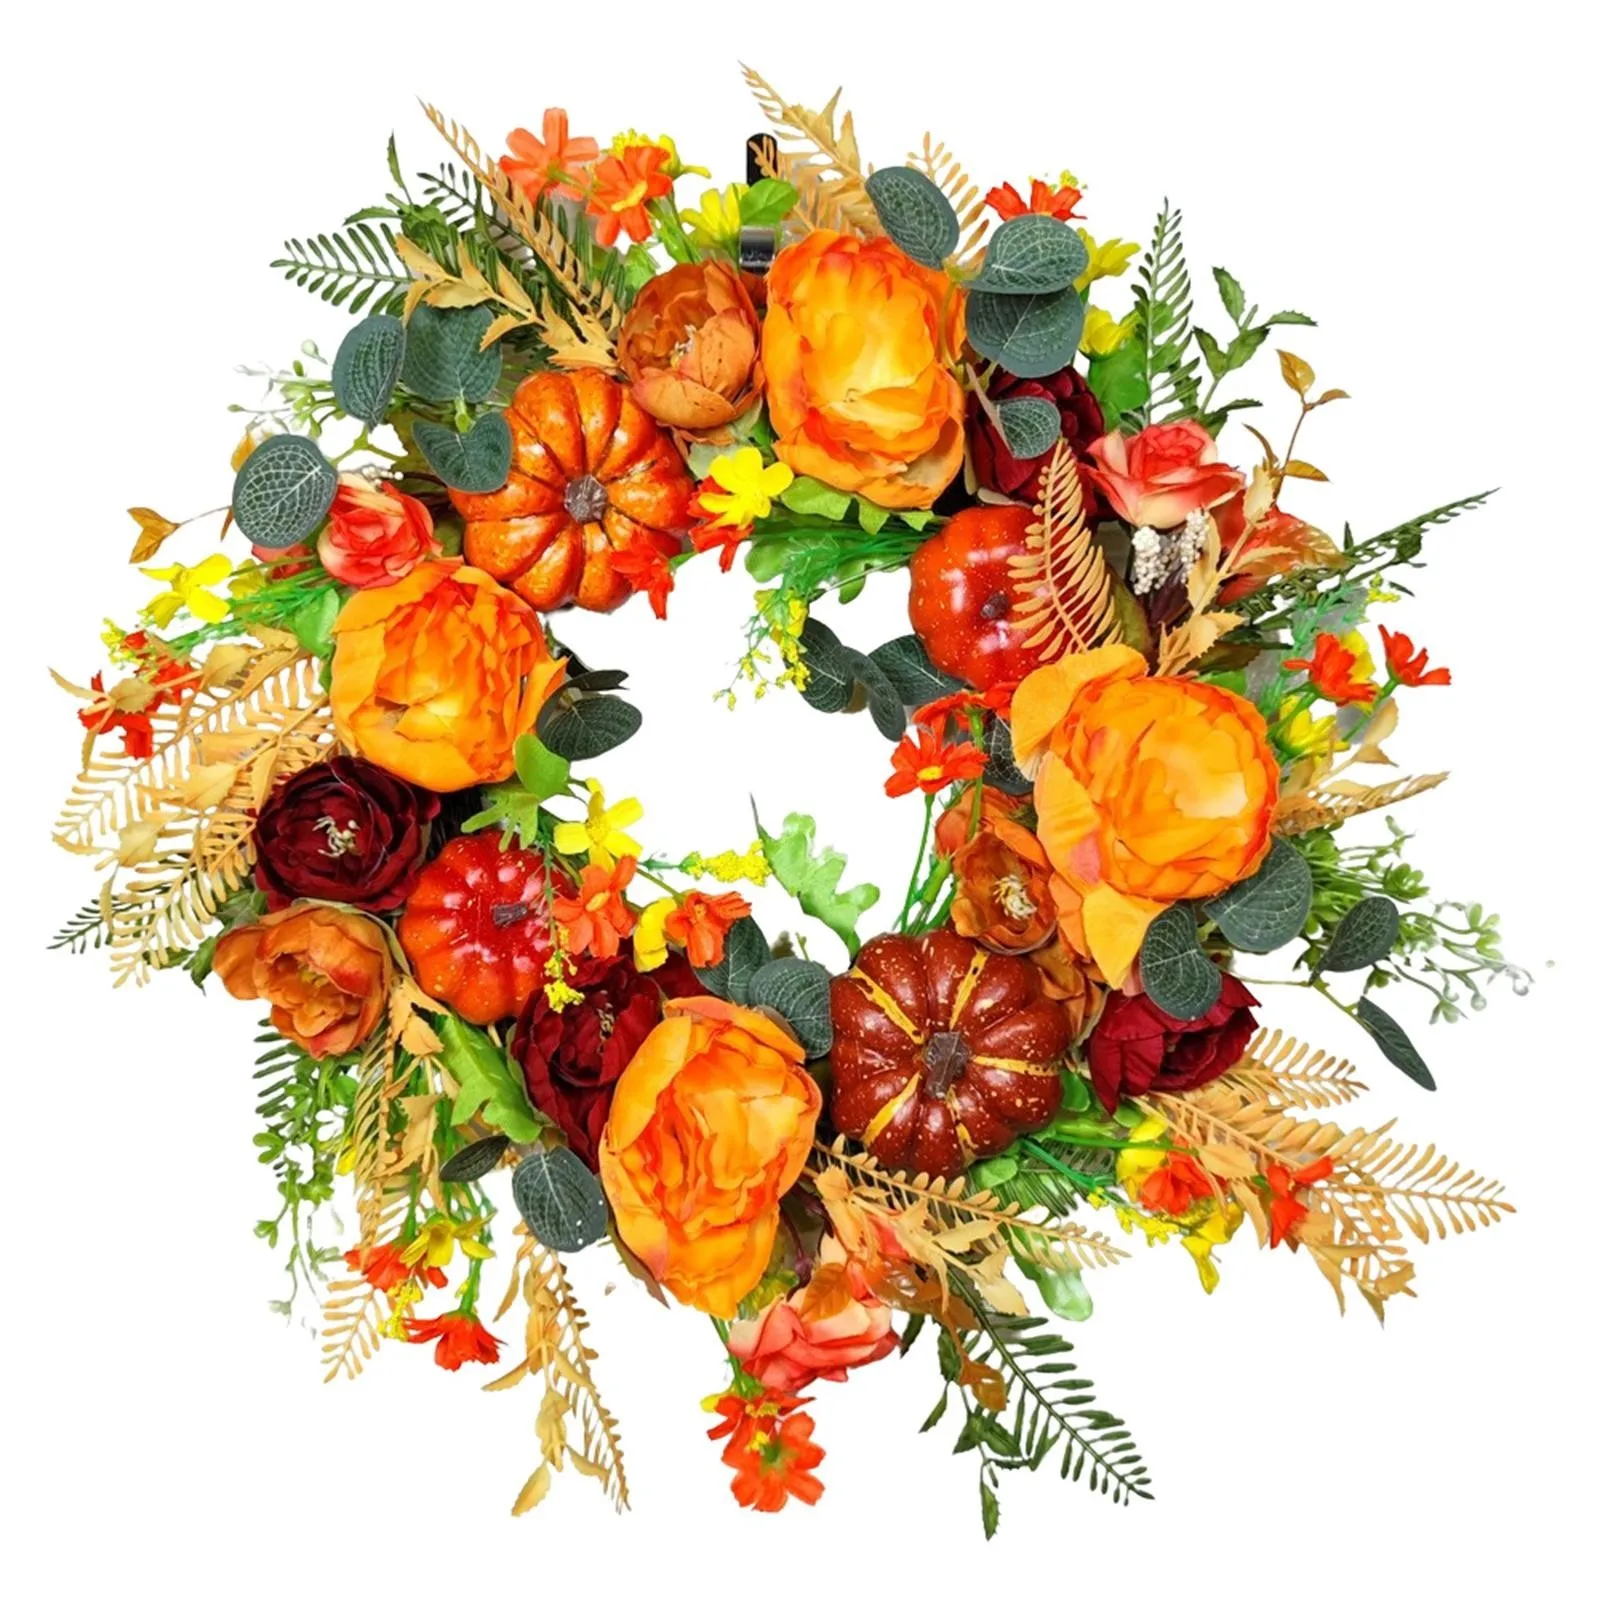 

Fall Peony And Pumpkin Wreath - Autumn Year Round Wreaths For Front Door Maple Leaves Artificial Fall Wreath Festival Decor #40